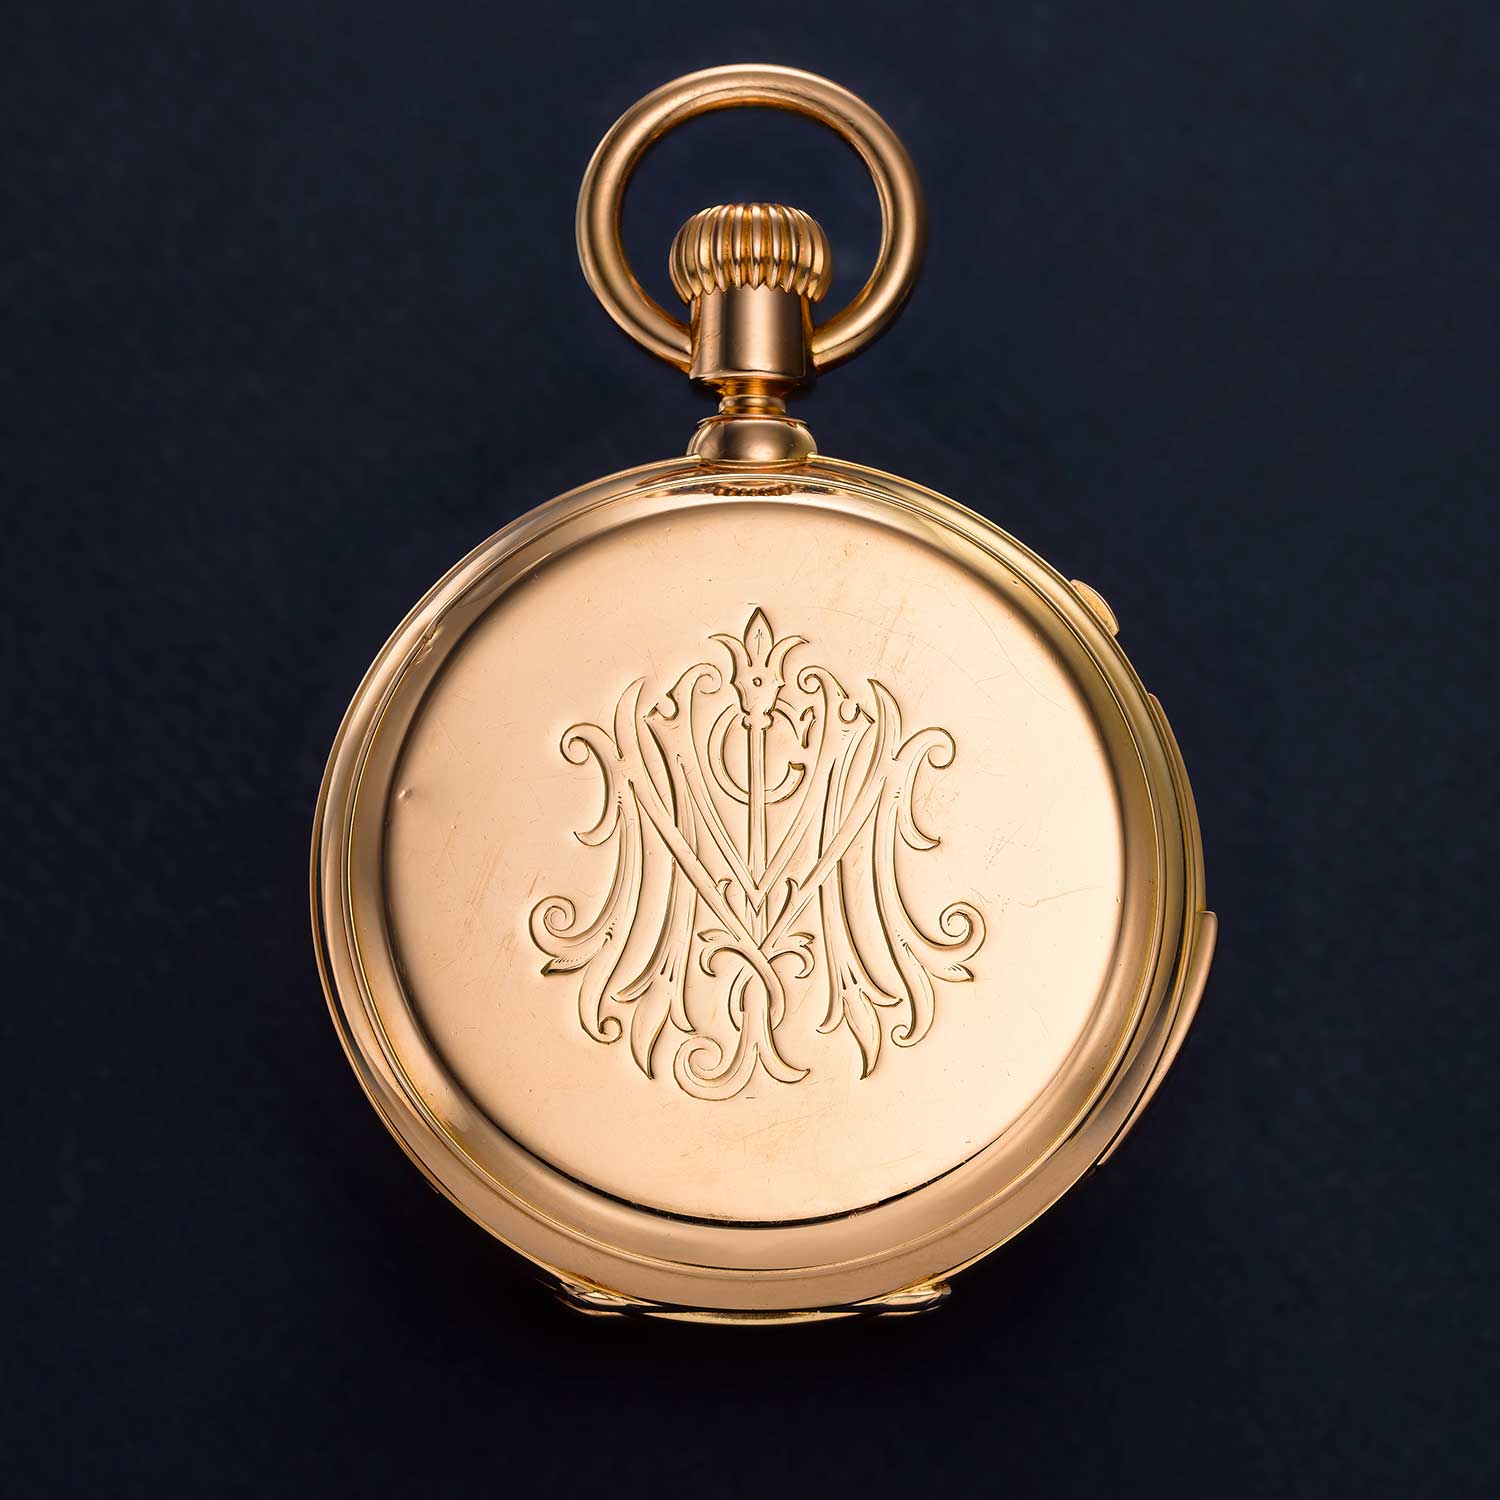 Patek Philippe minute repeating chronograph pocket watch - Collectability